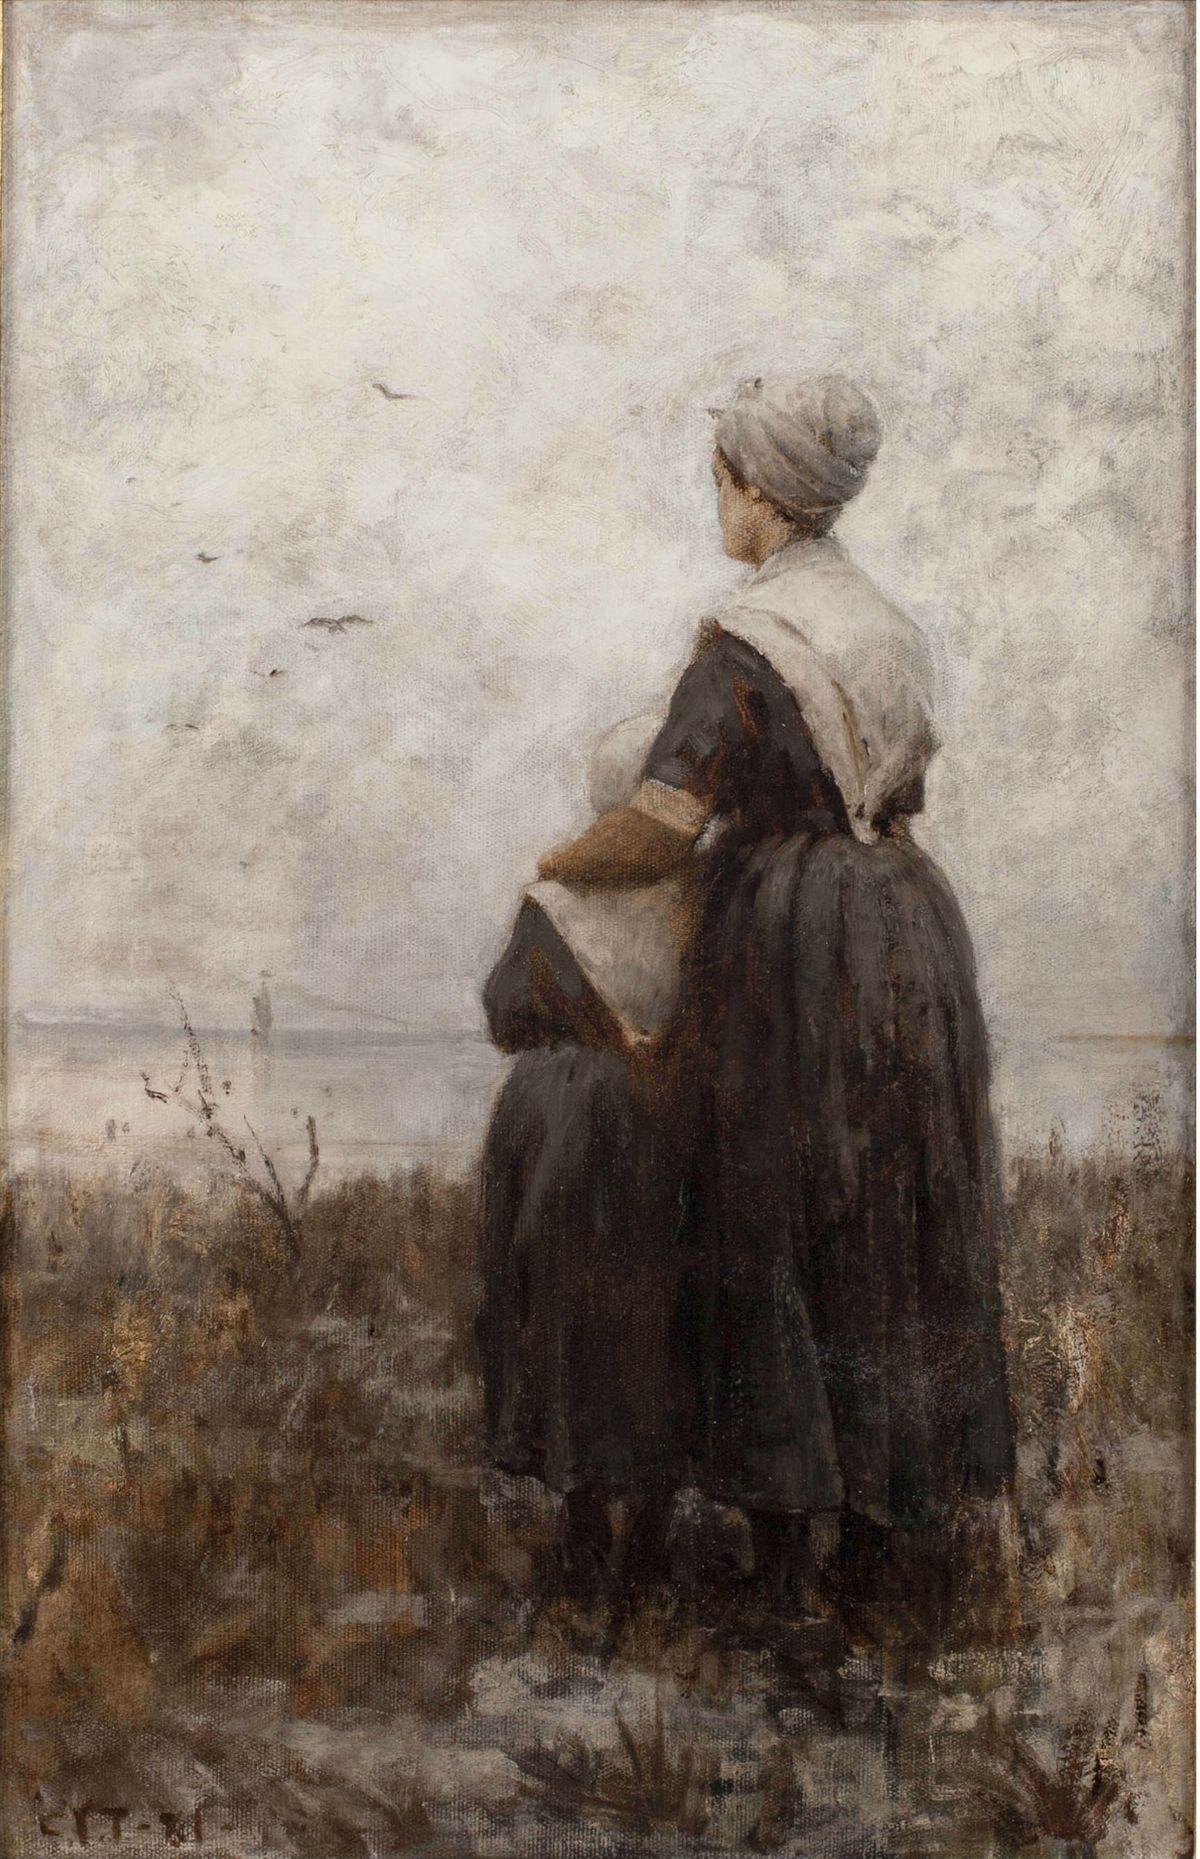 CHARLES YARDLEY TURNER (1850—1919)
Saying Goodbye, 1881
Oil on canvas
27 x 17 inches
Signed with initials “C.Y.T” and dated ’81 lower left

Provenance: Wilkes University, Wilkes-Barre, PA

No painter has been more successful in delineating the